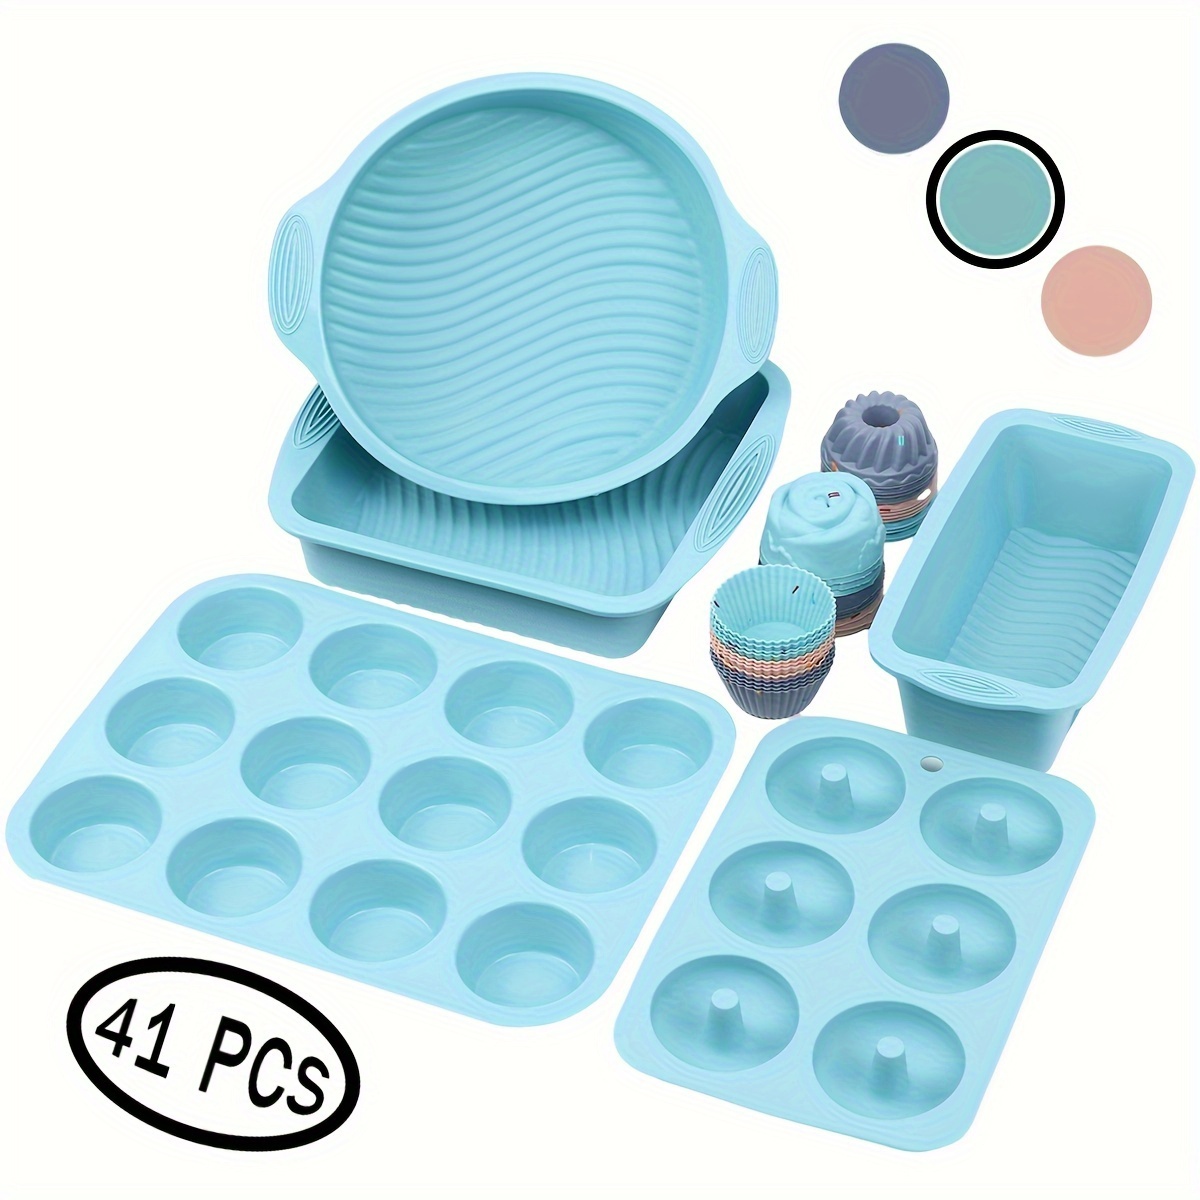 To encounter 41 Pieces Silicone Bakeware Set, Silicone Cake Molds, Nonstick  Baking Sheet, Silicone Donut Baking Pans, 12Cup Muff